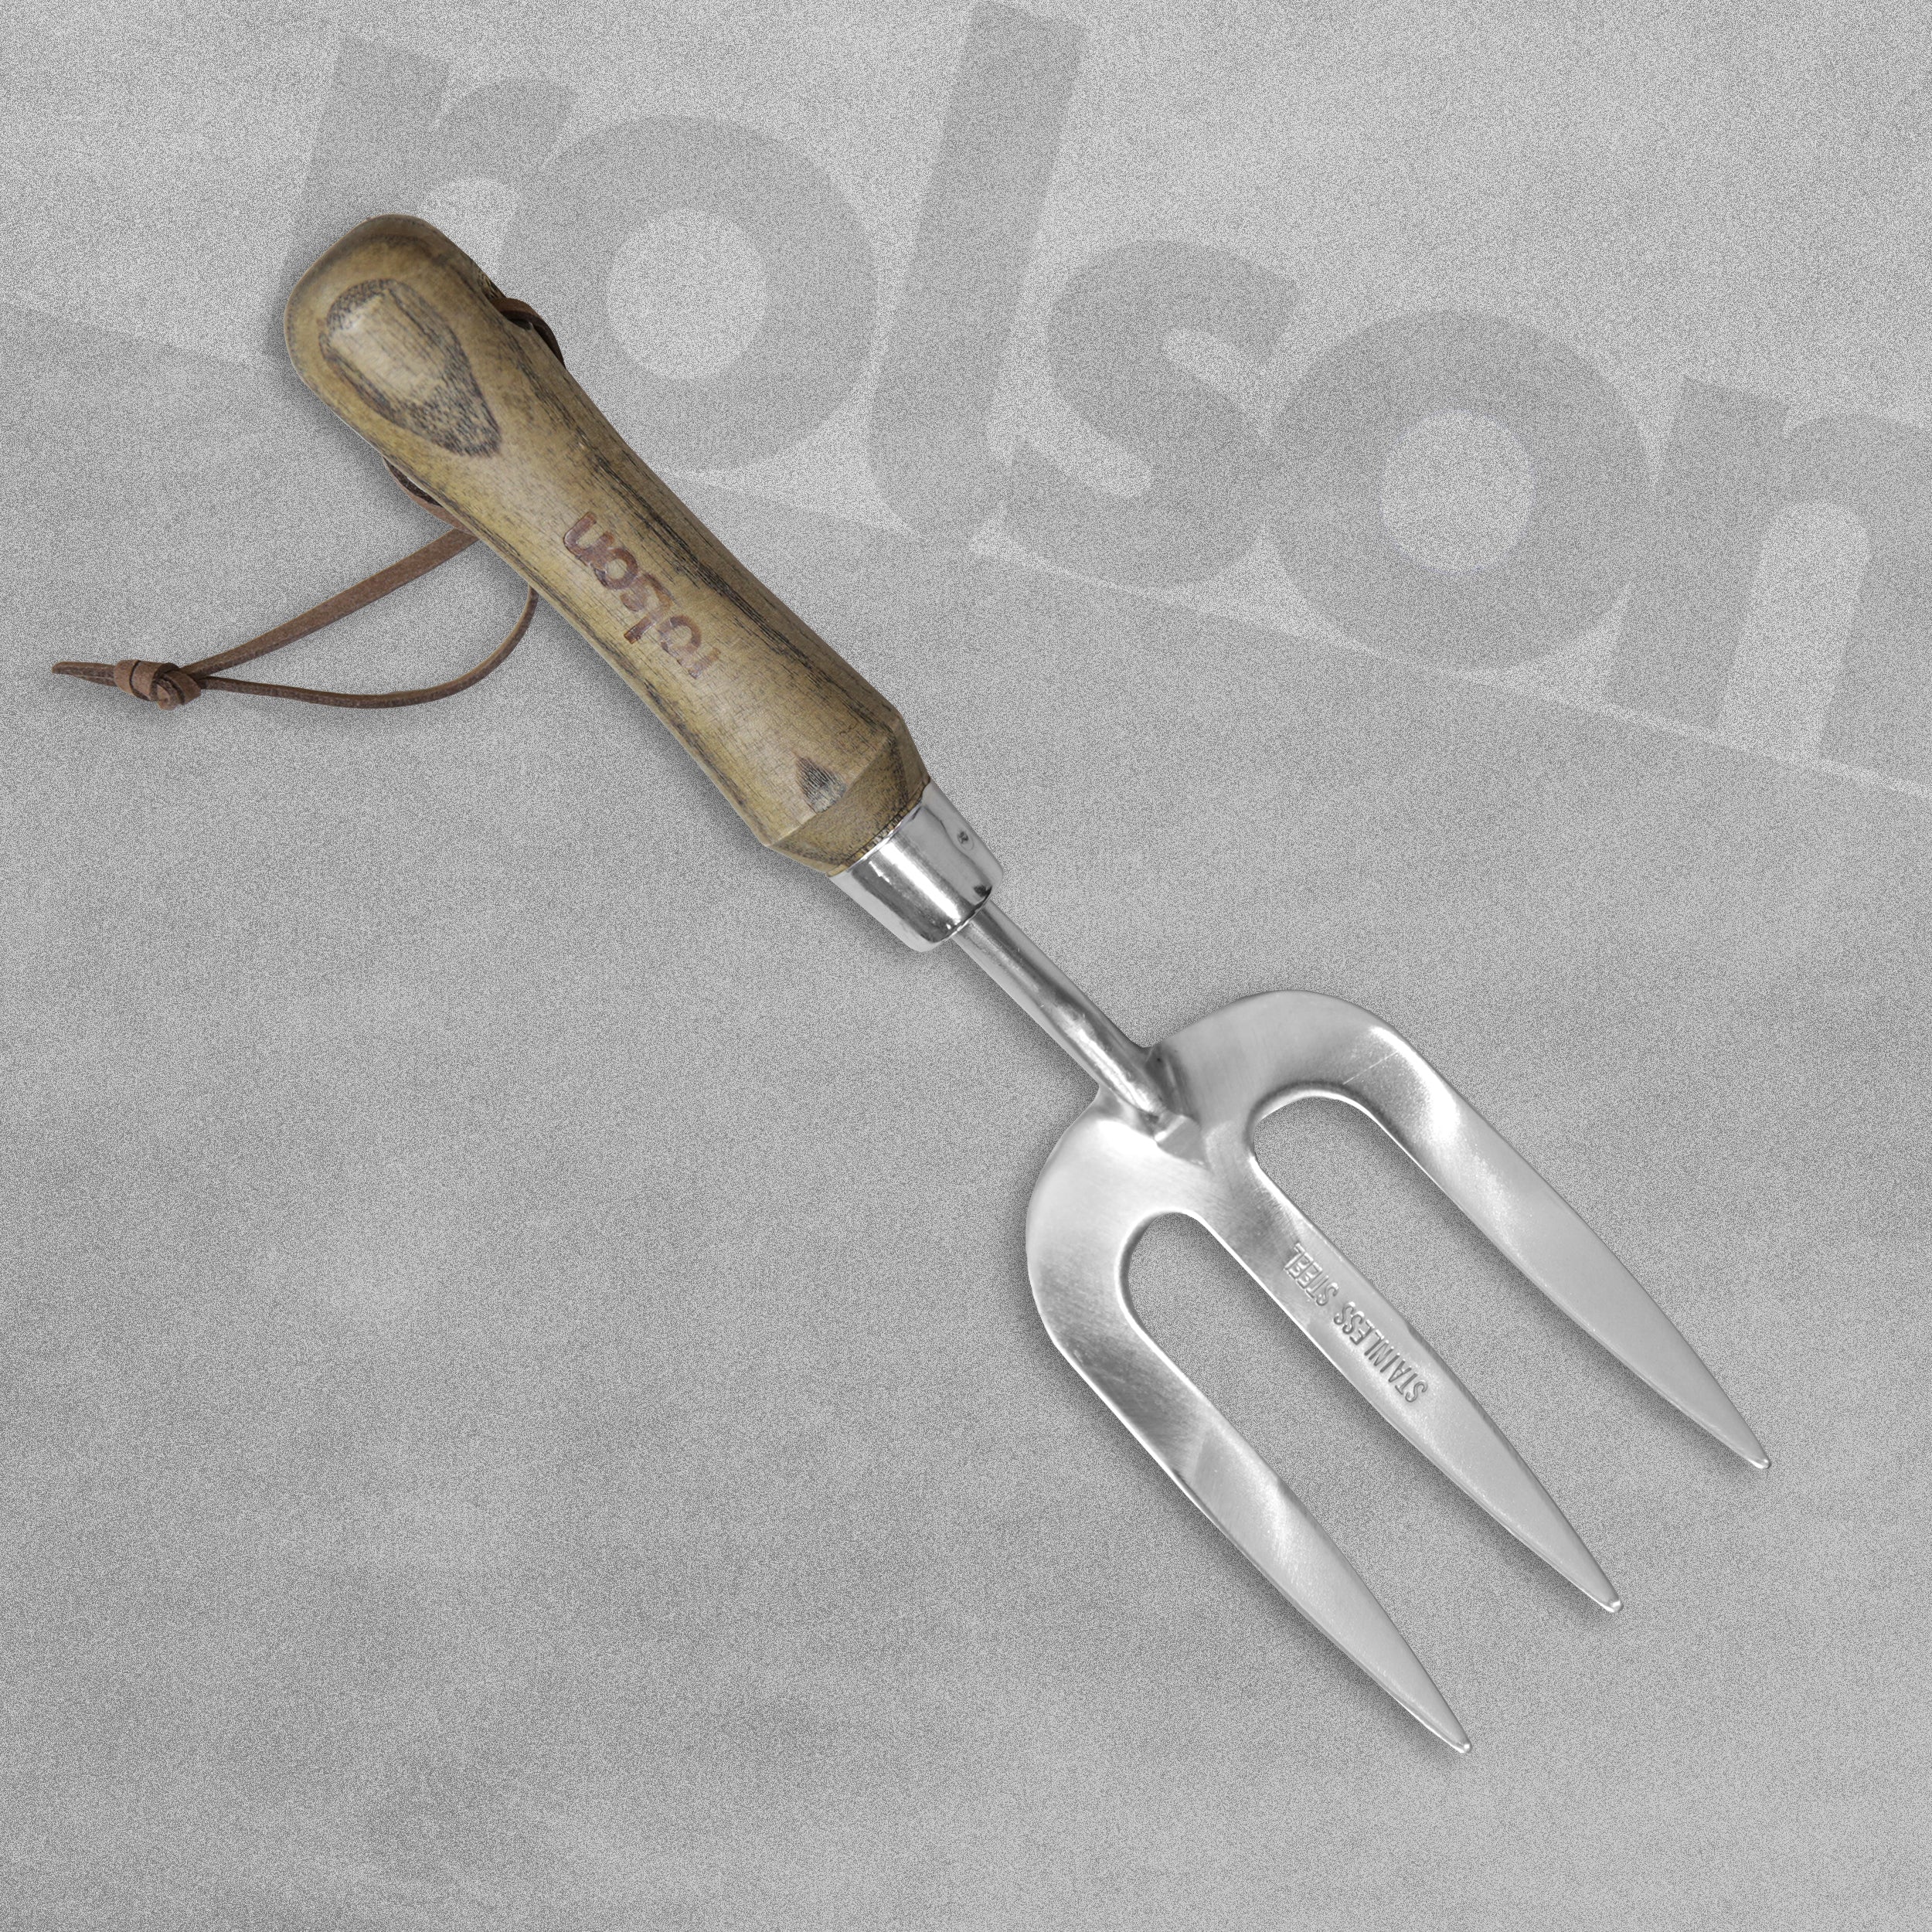 Rolson Stainless Steel Hand Fork with Ash Handle